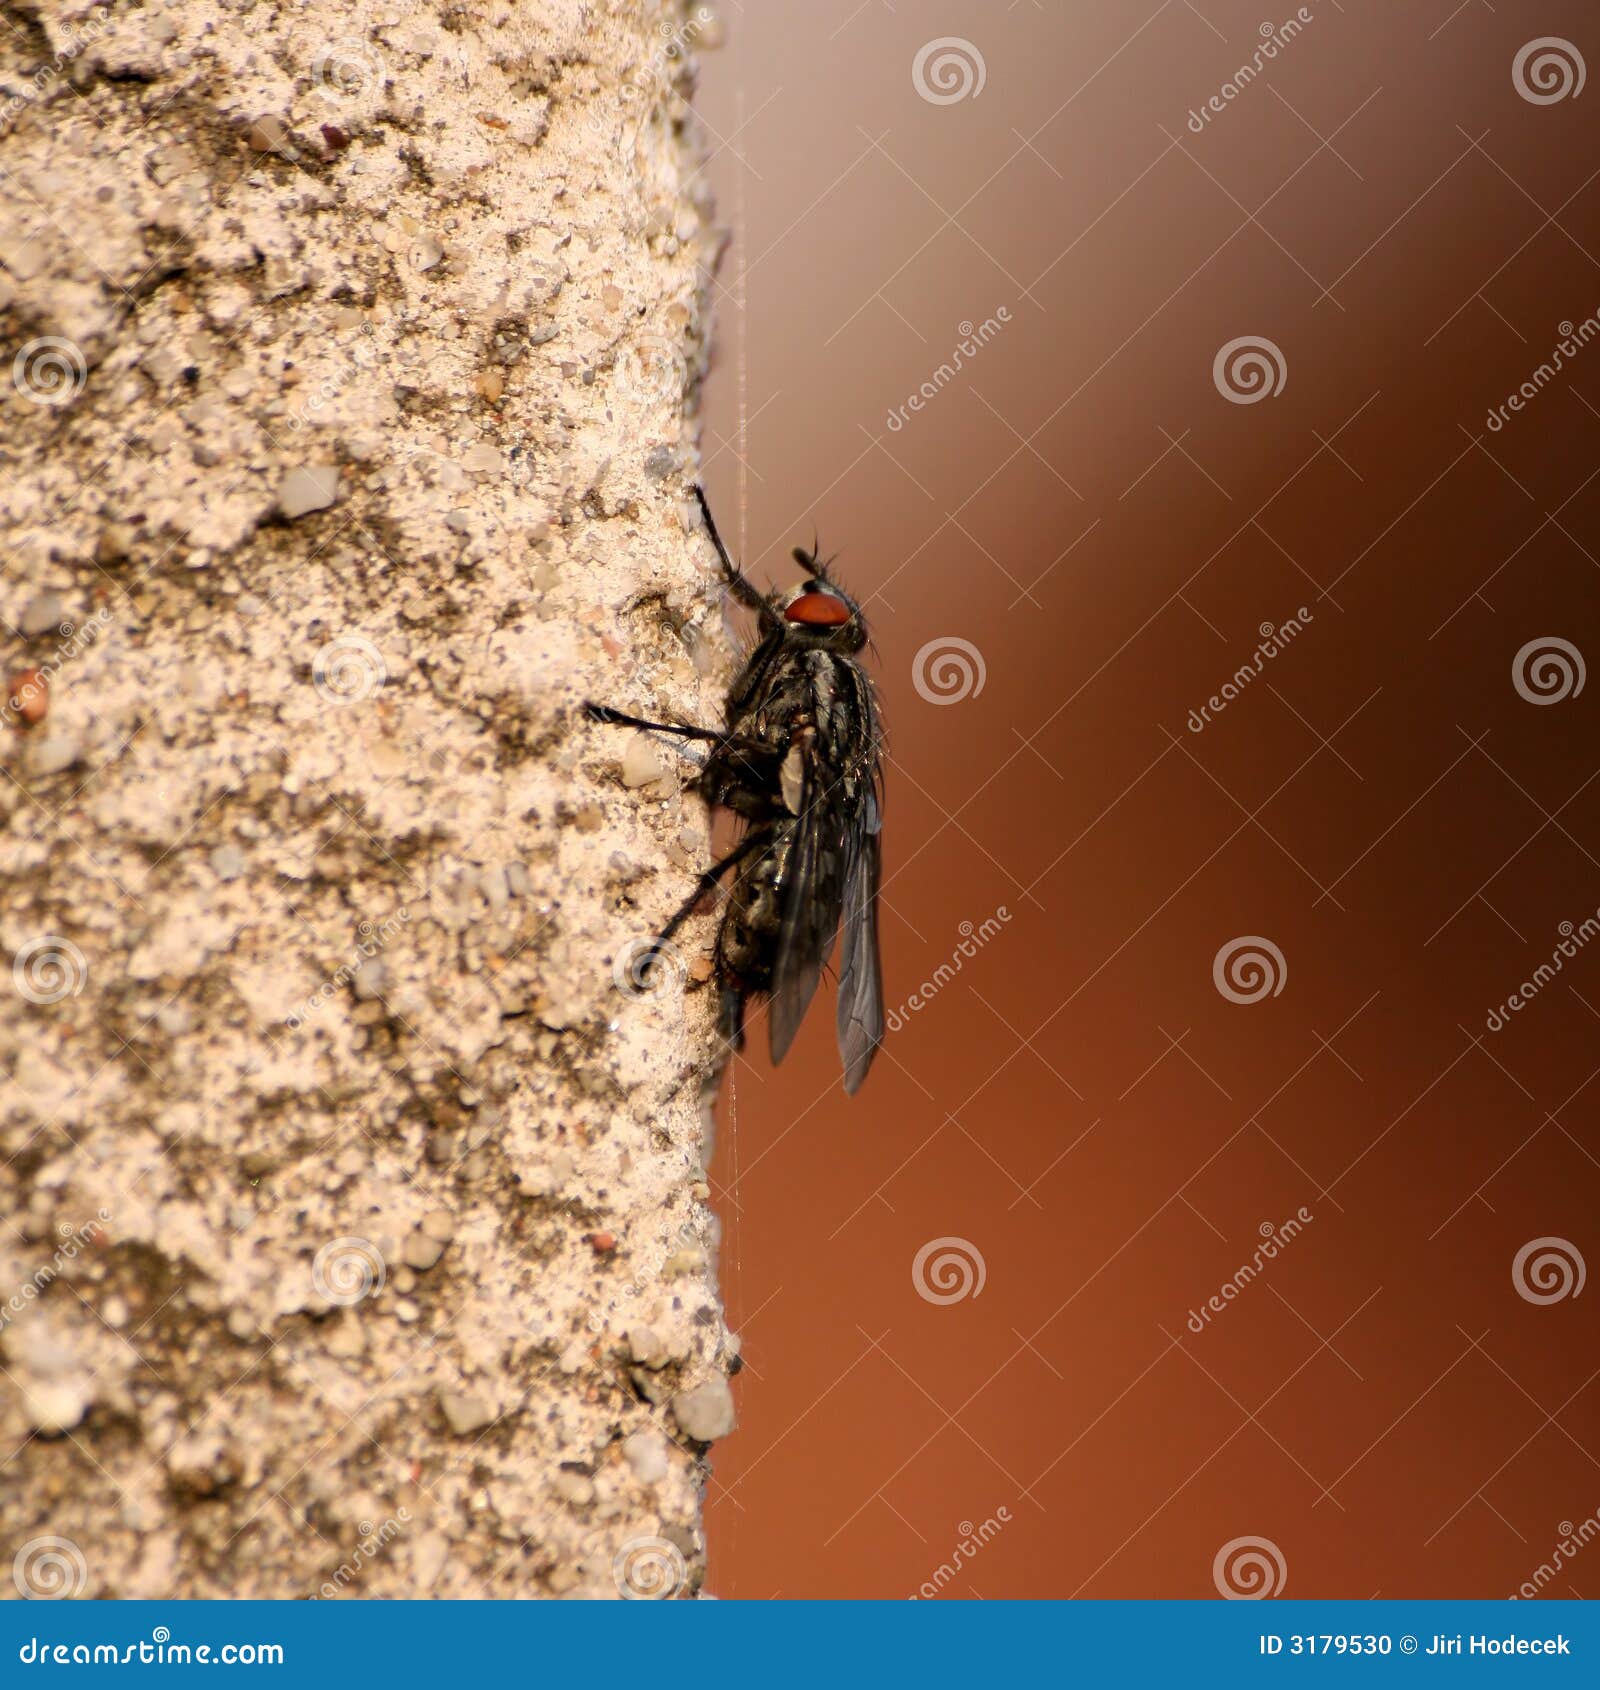 musca domestica on wall